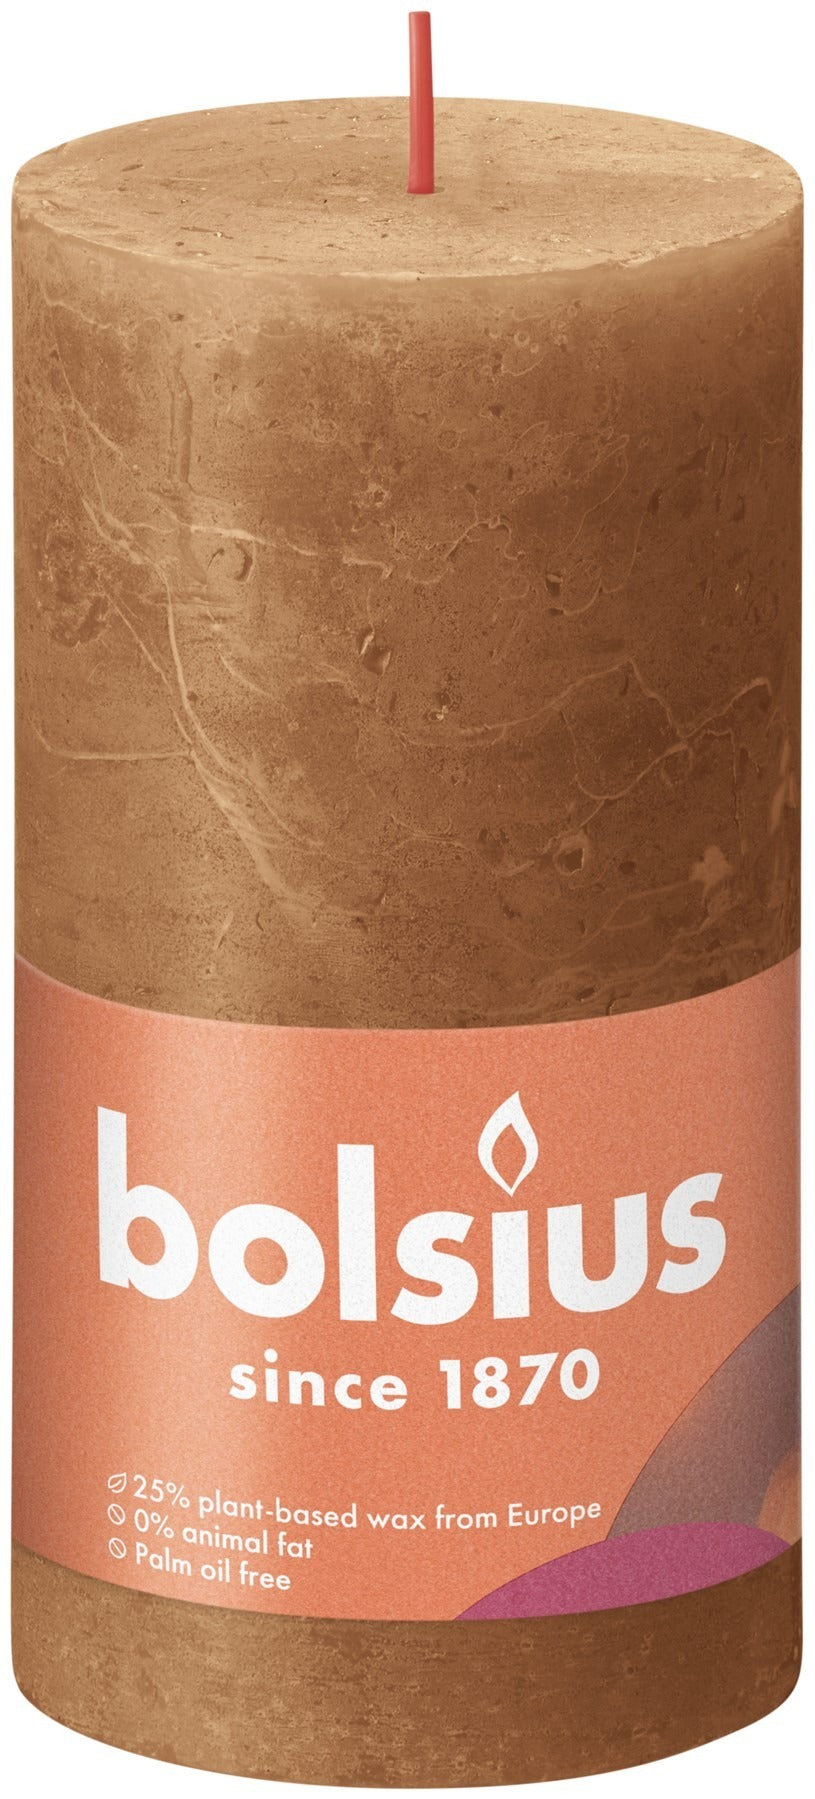 View Spice Brown Bolsius Rustic Shine Pillar Candle 130 x 68 mm information